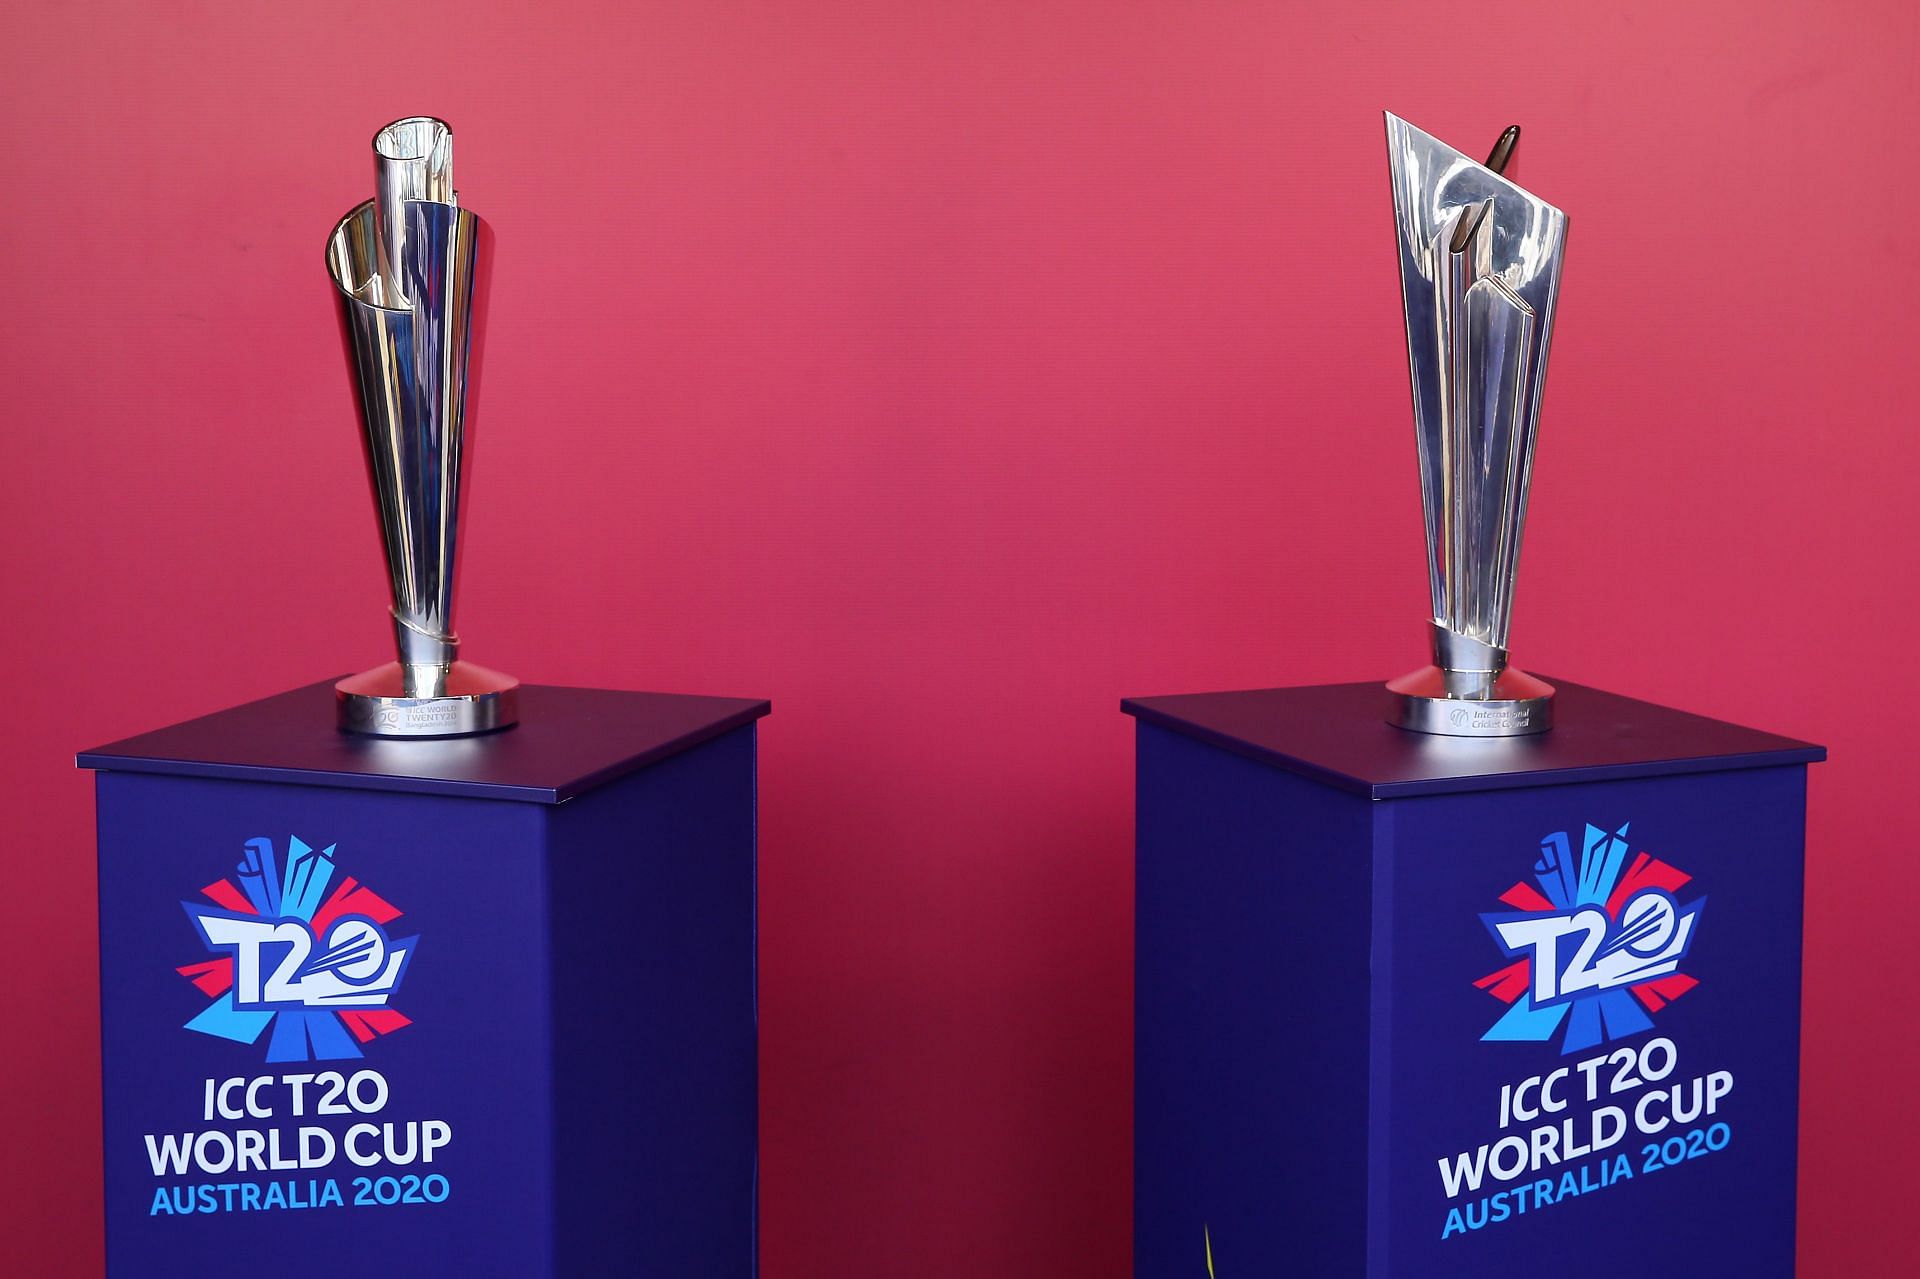 The next ICC T20 World Cup will happen in Australia